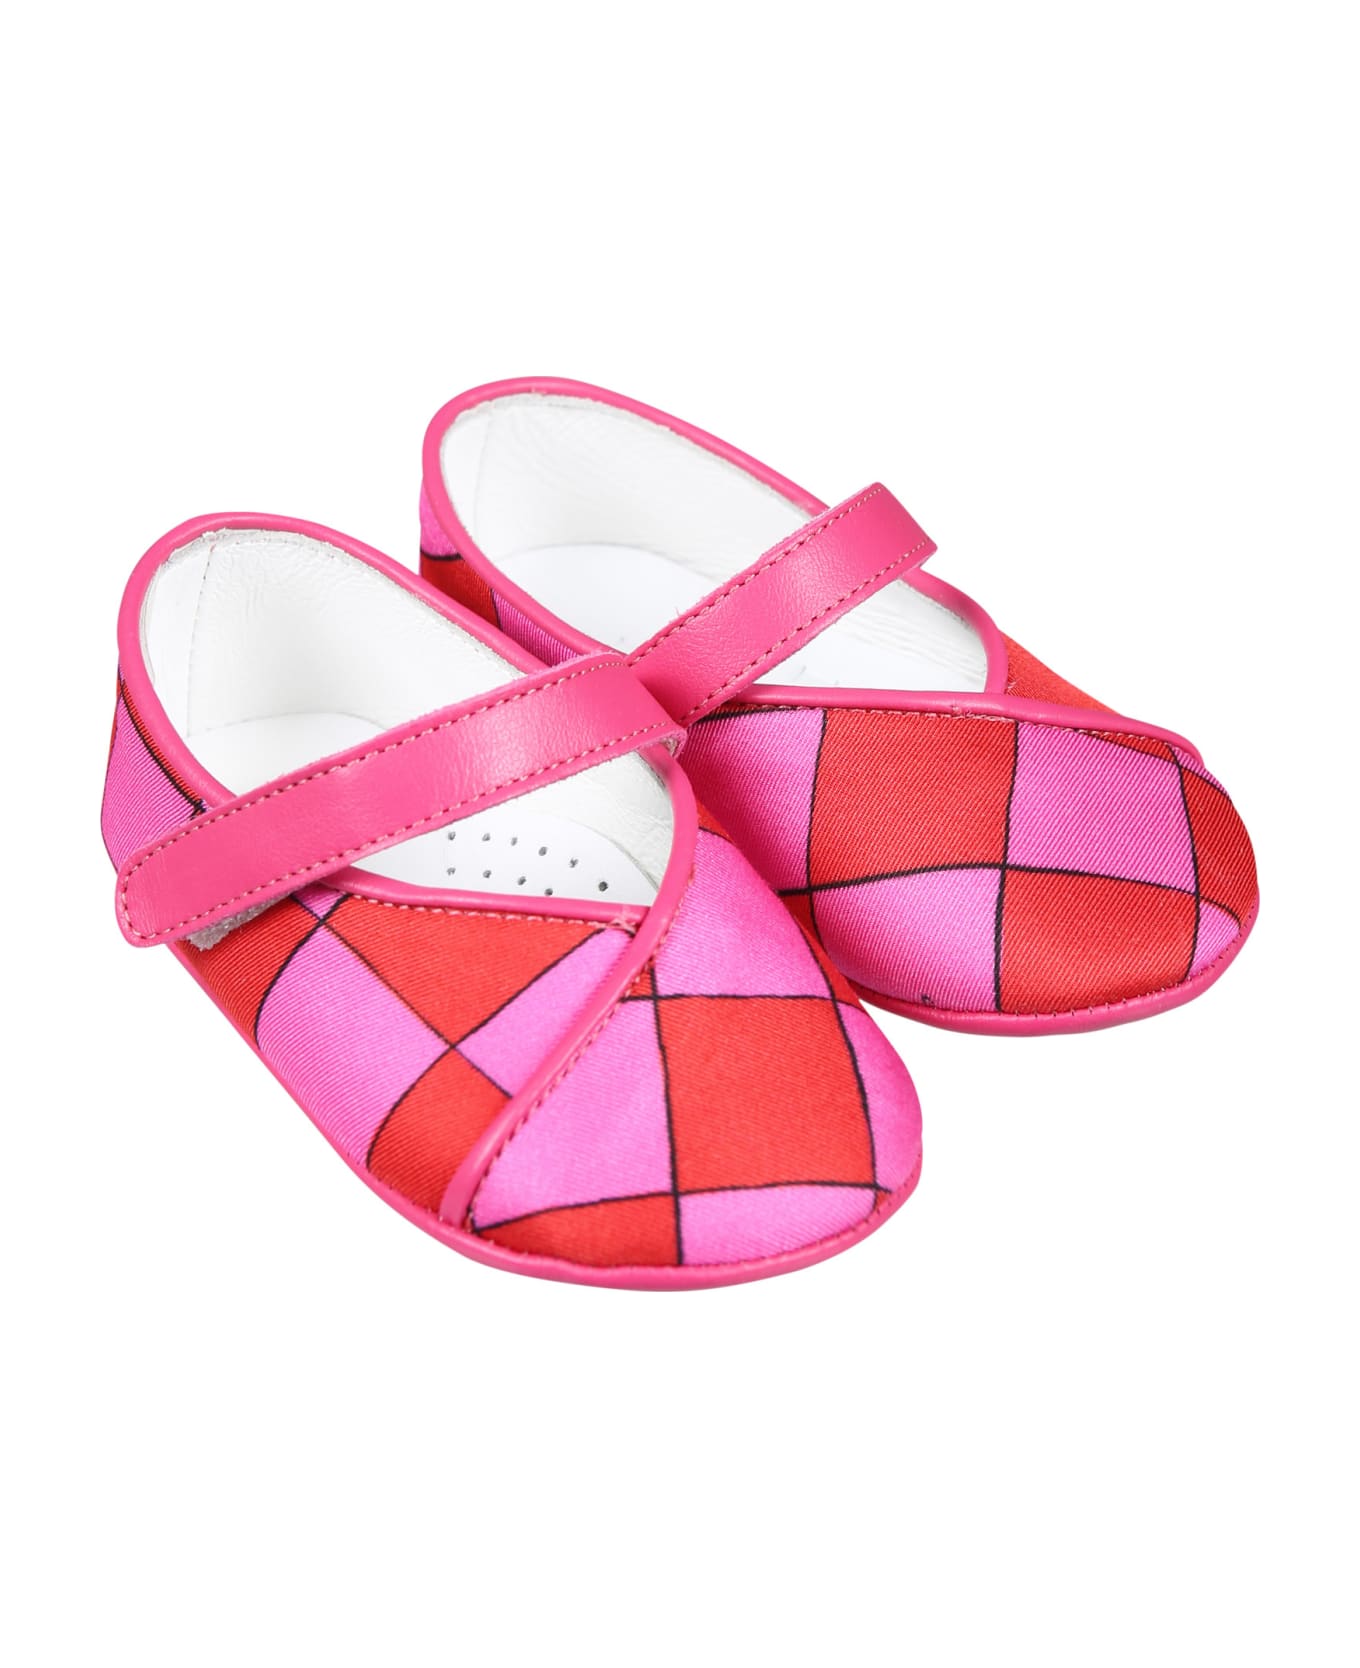 Pucci Multicolor Ballet Flats For Baby Girl With Iconic Multicolor Print - Multicolor